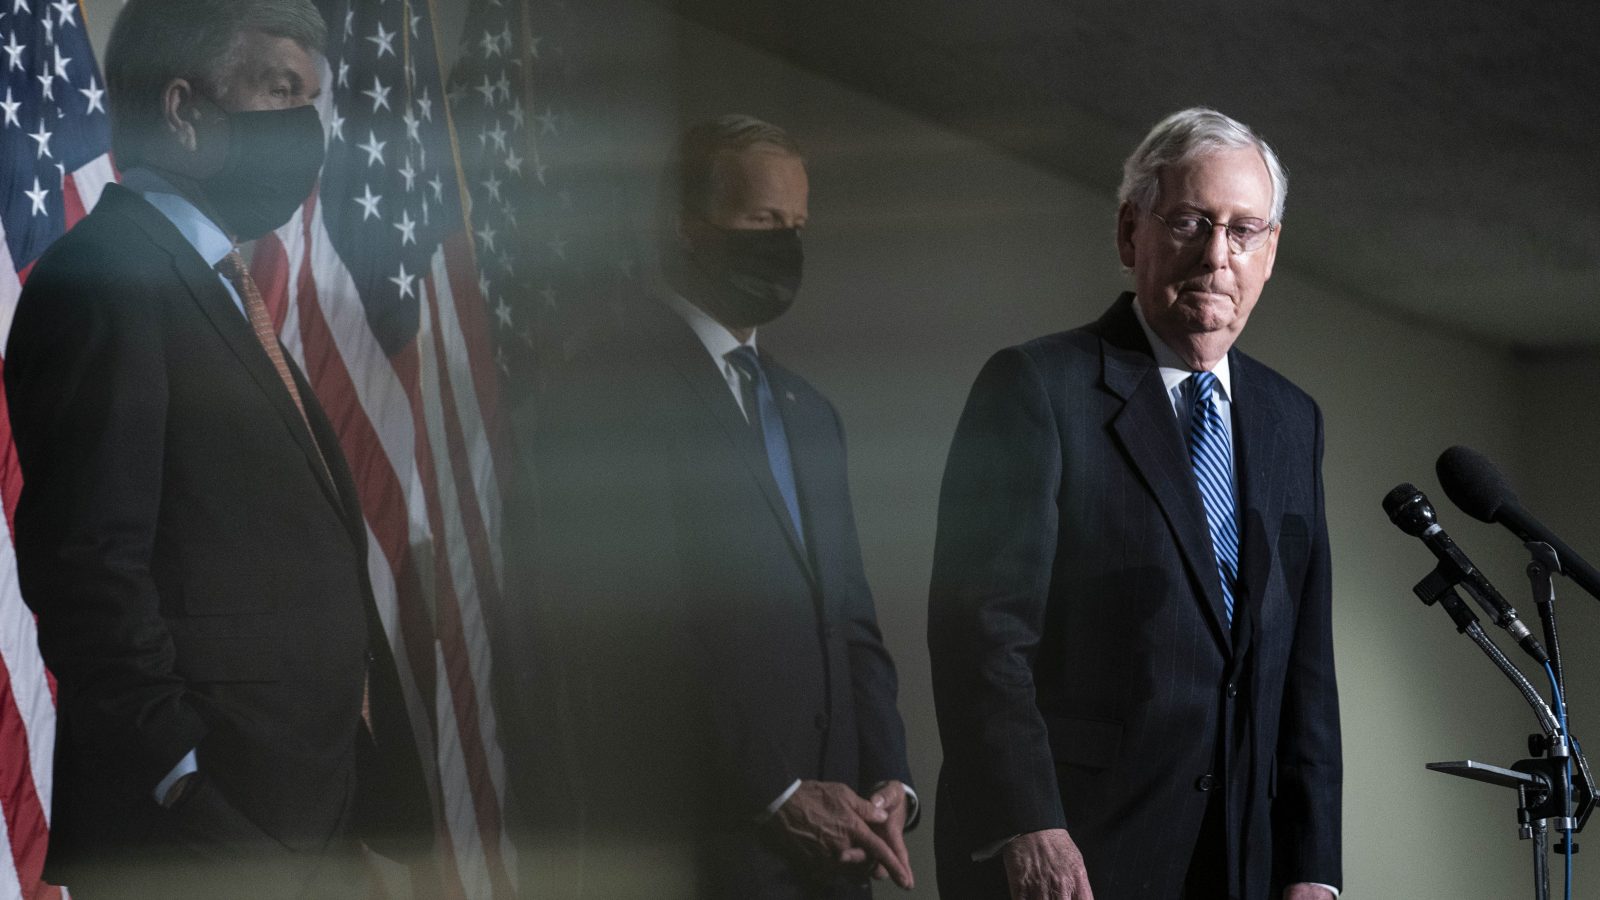 Mitch McConnell looking glum